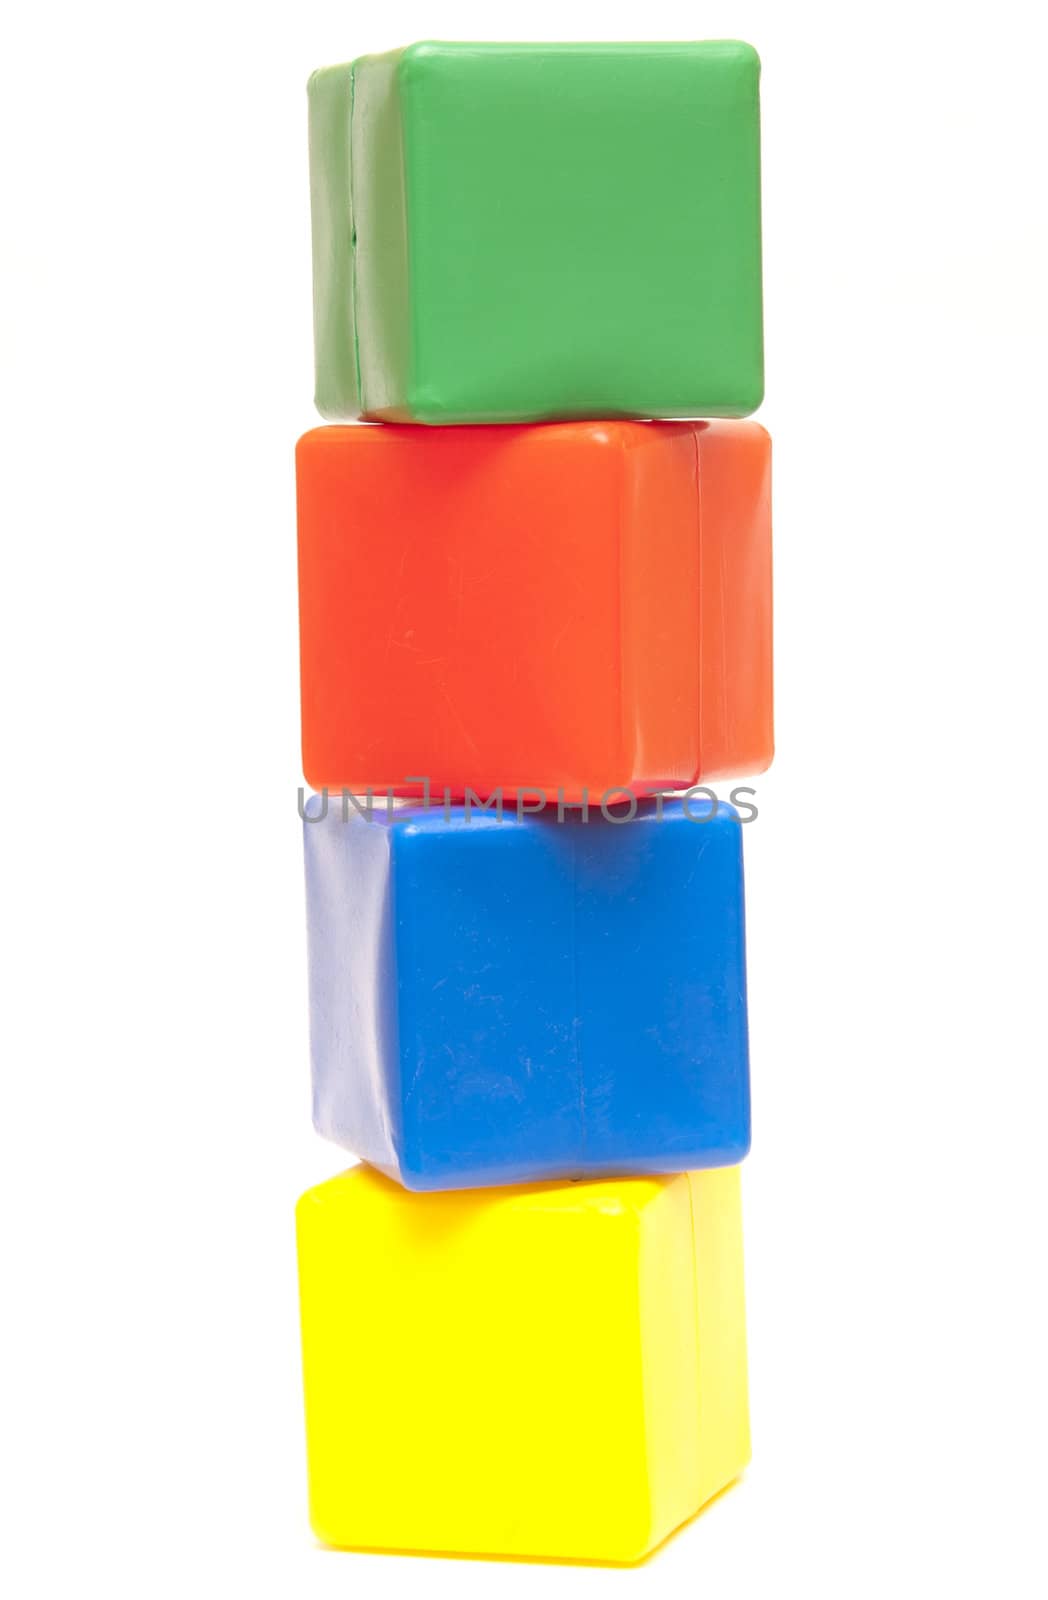 colored childrens cubes on a white background 